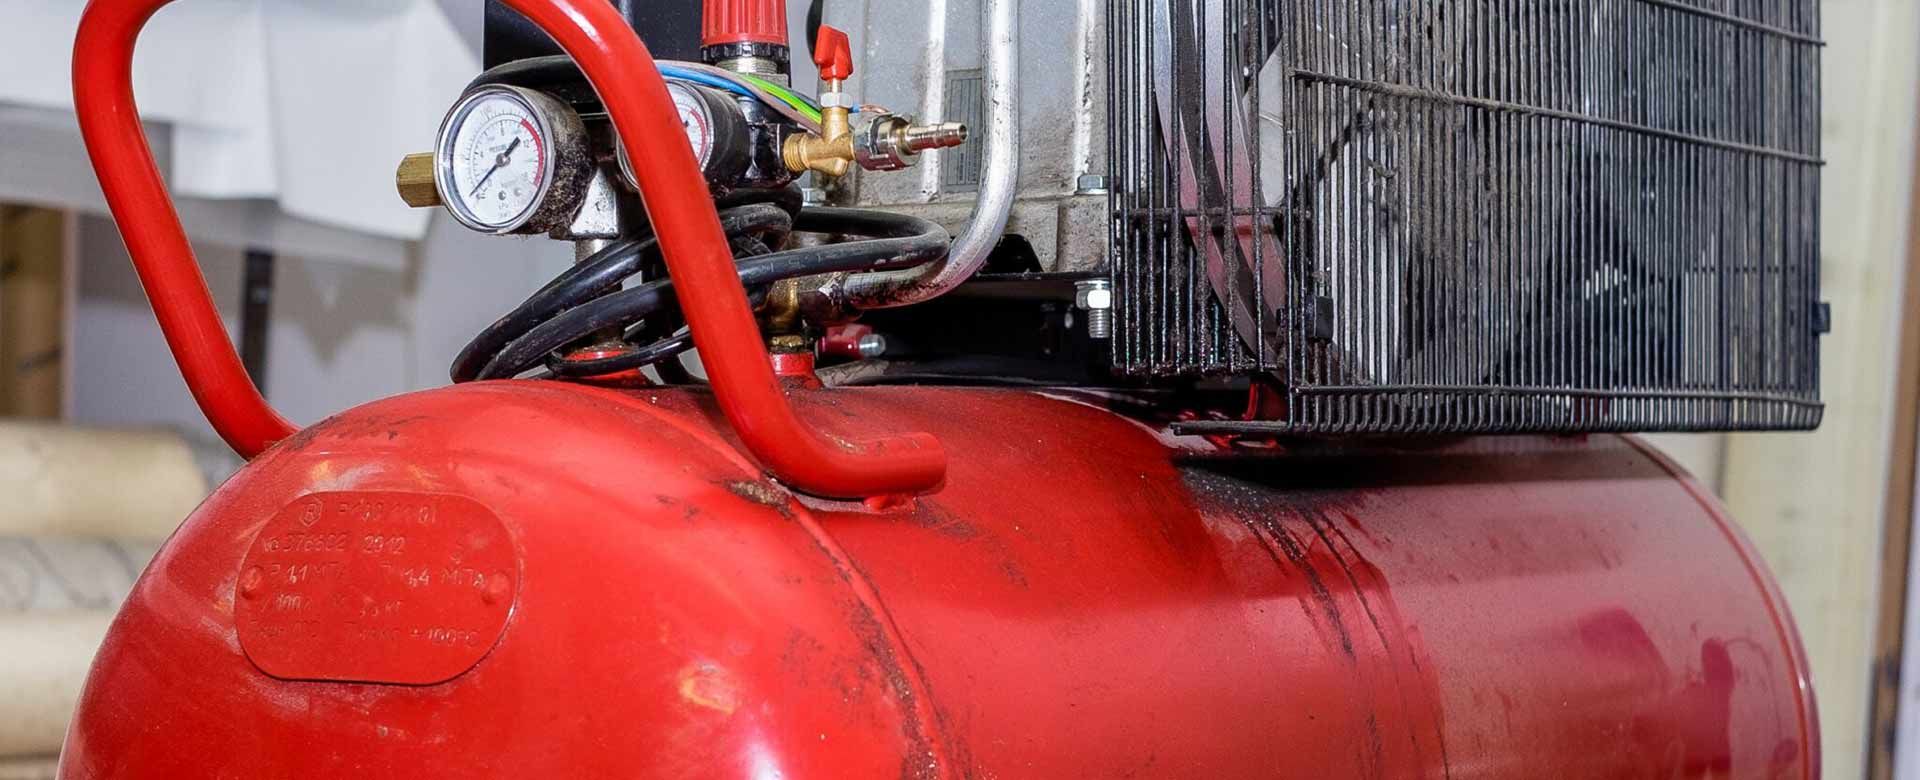 How to clean your air compressor